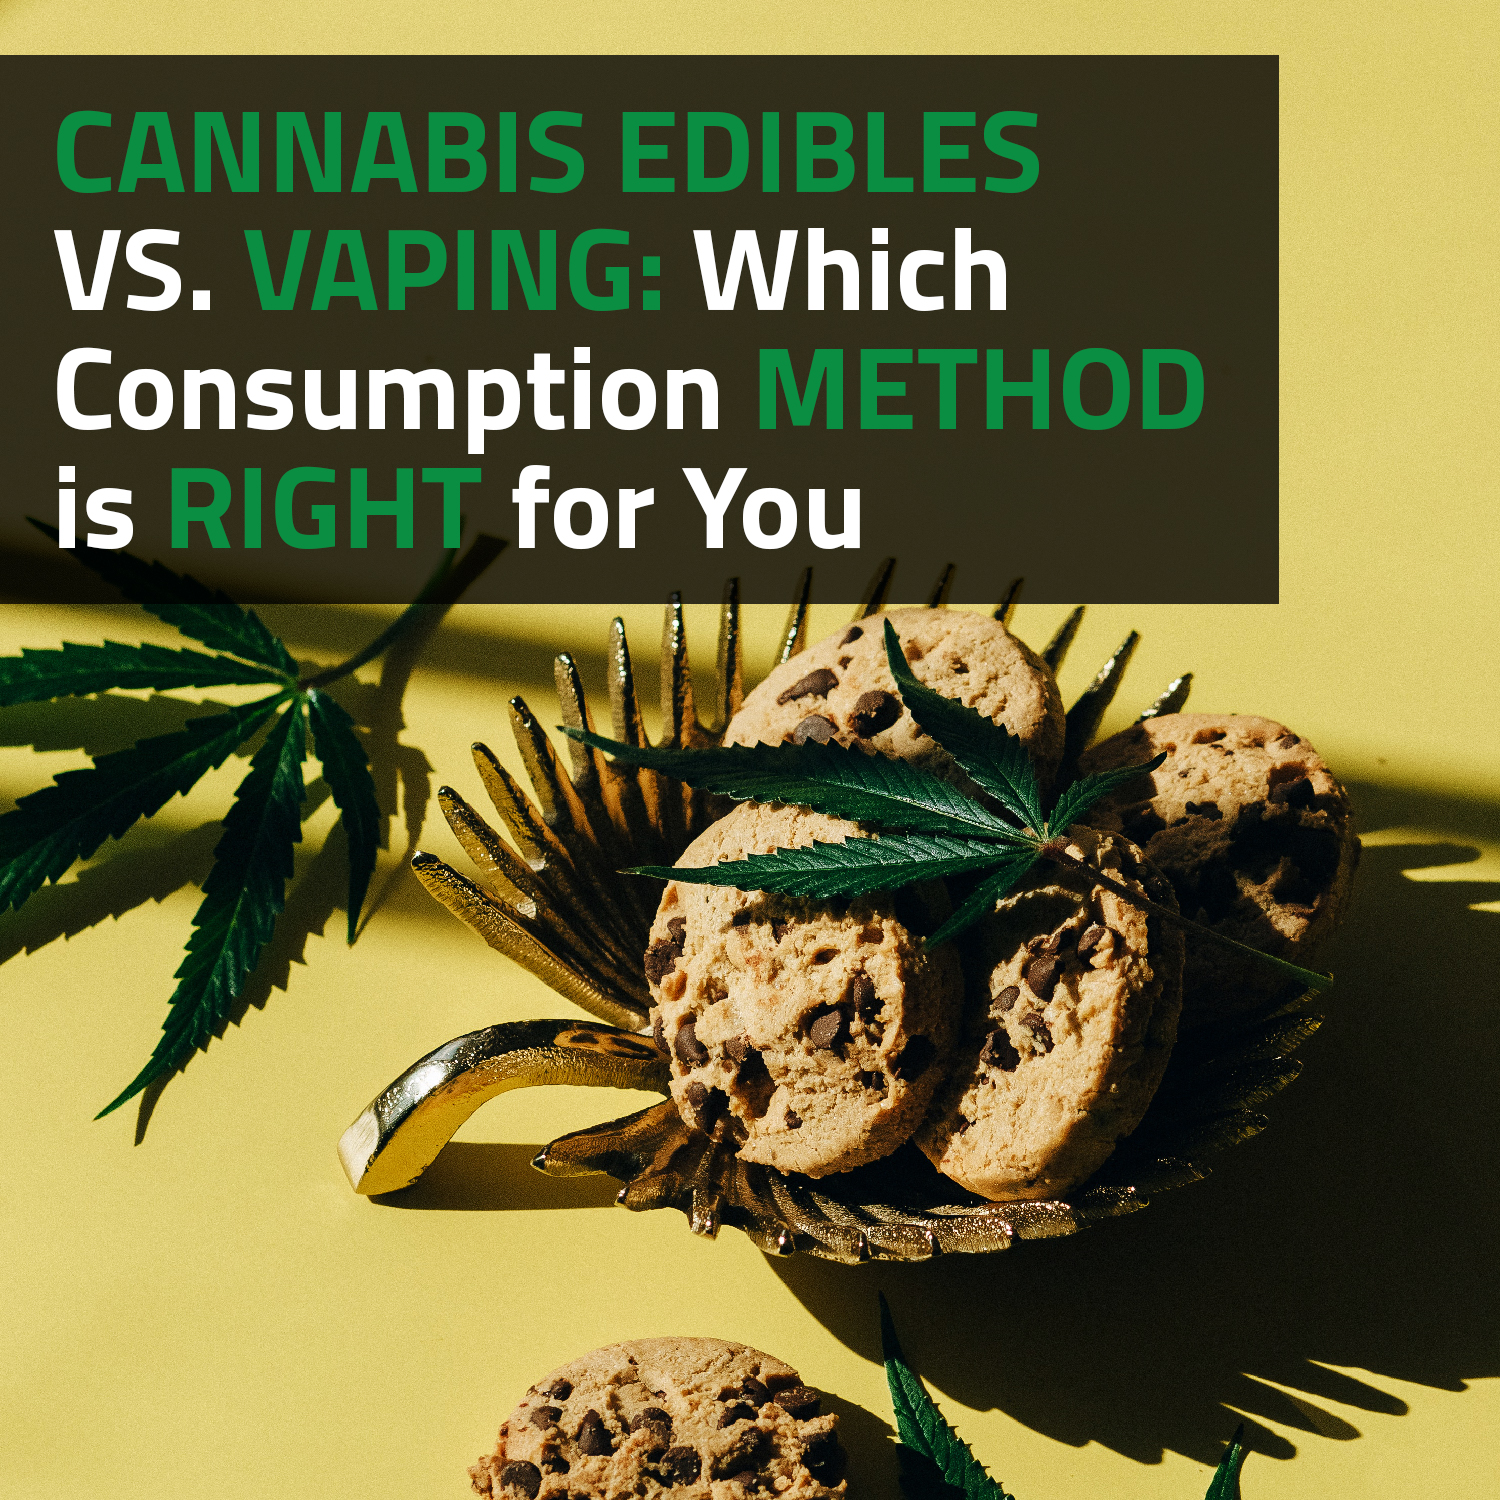 Cannabis Edibles Vs. Vaping: Which Consumption Method Is Right For You